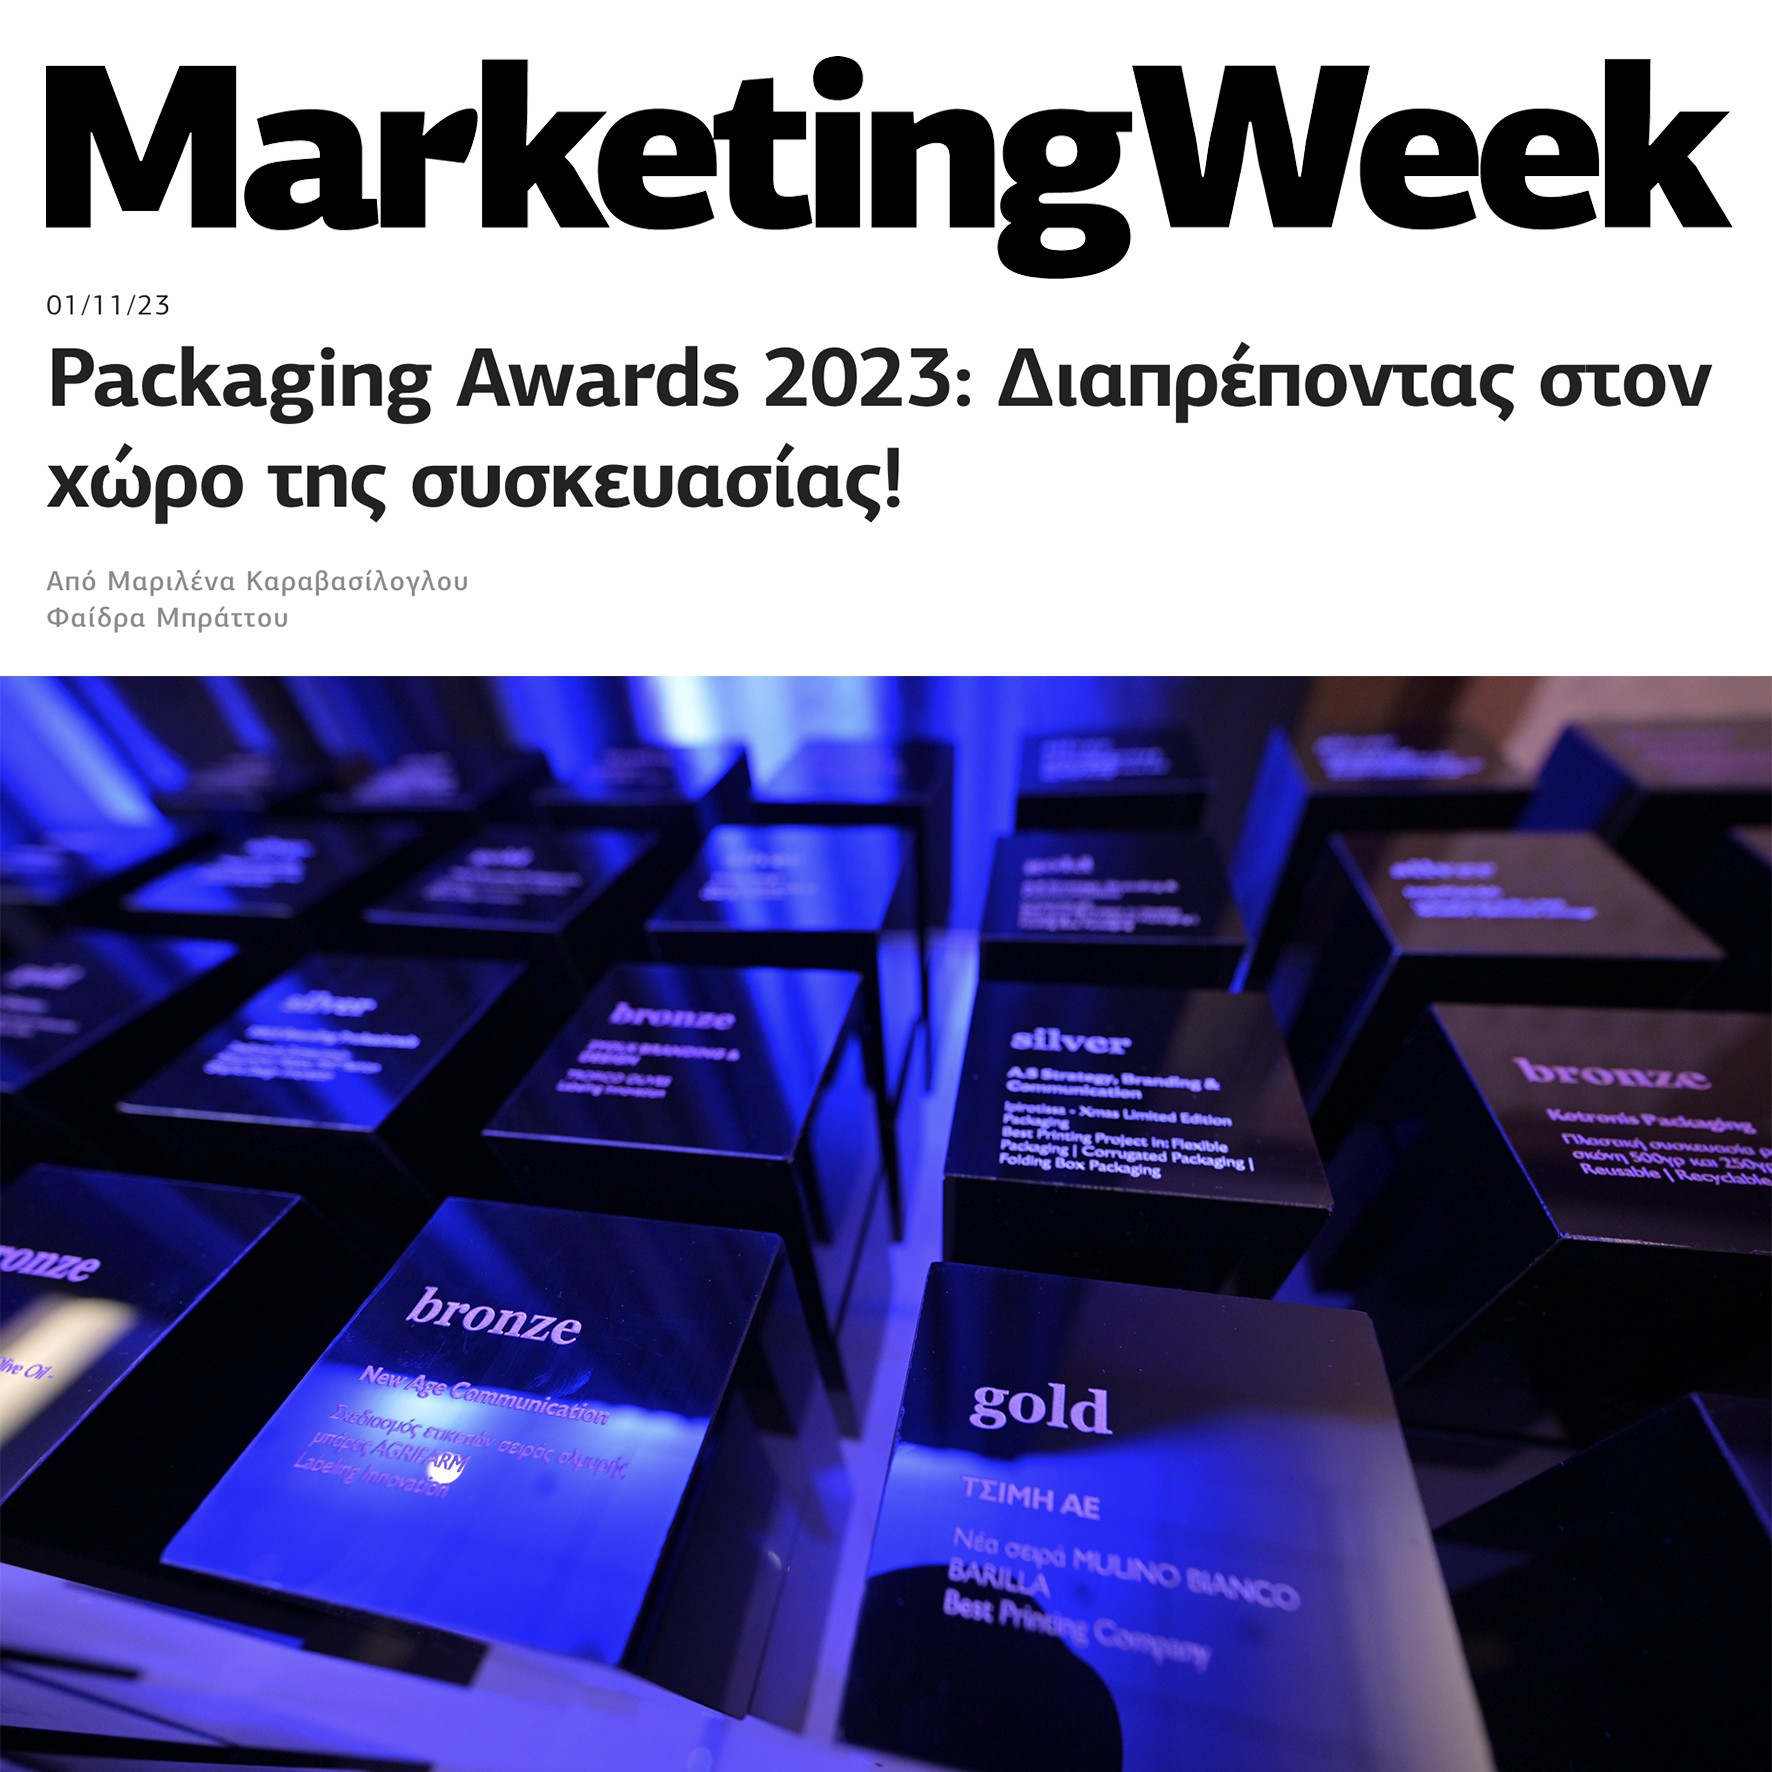 Feature in Marketing Week for winning at Packaging Awards 2023